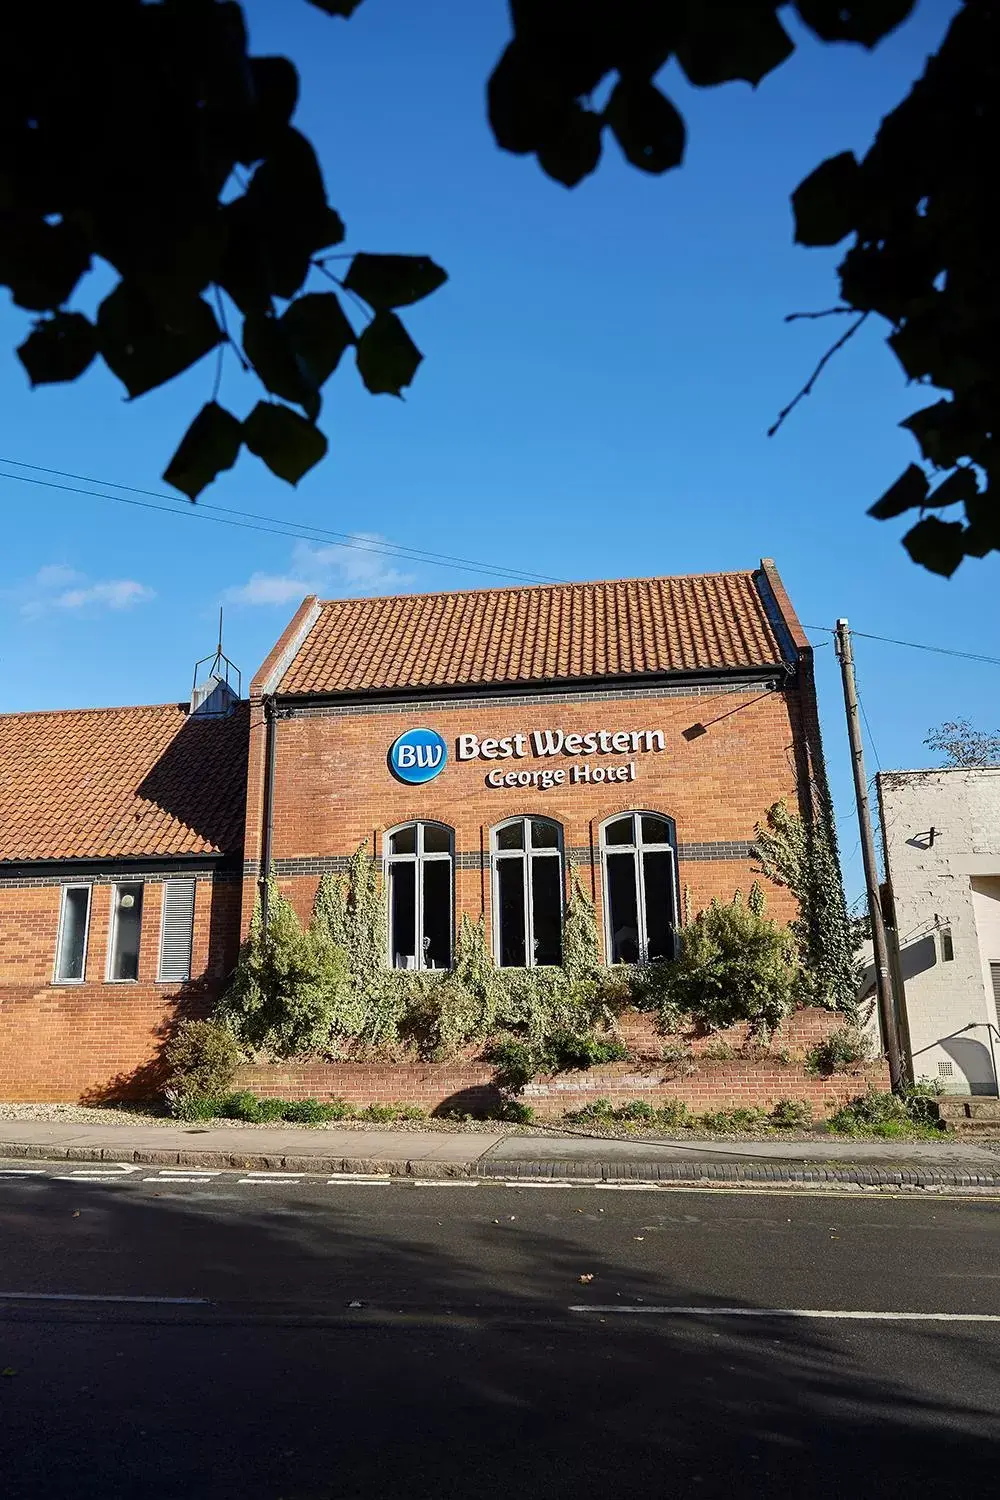 Banquet/Function facilities, Property Building in Best Western The George Hotel, Swaffham